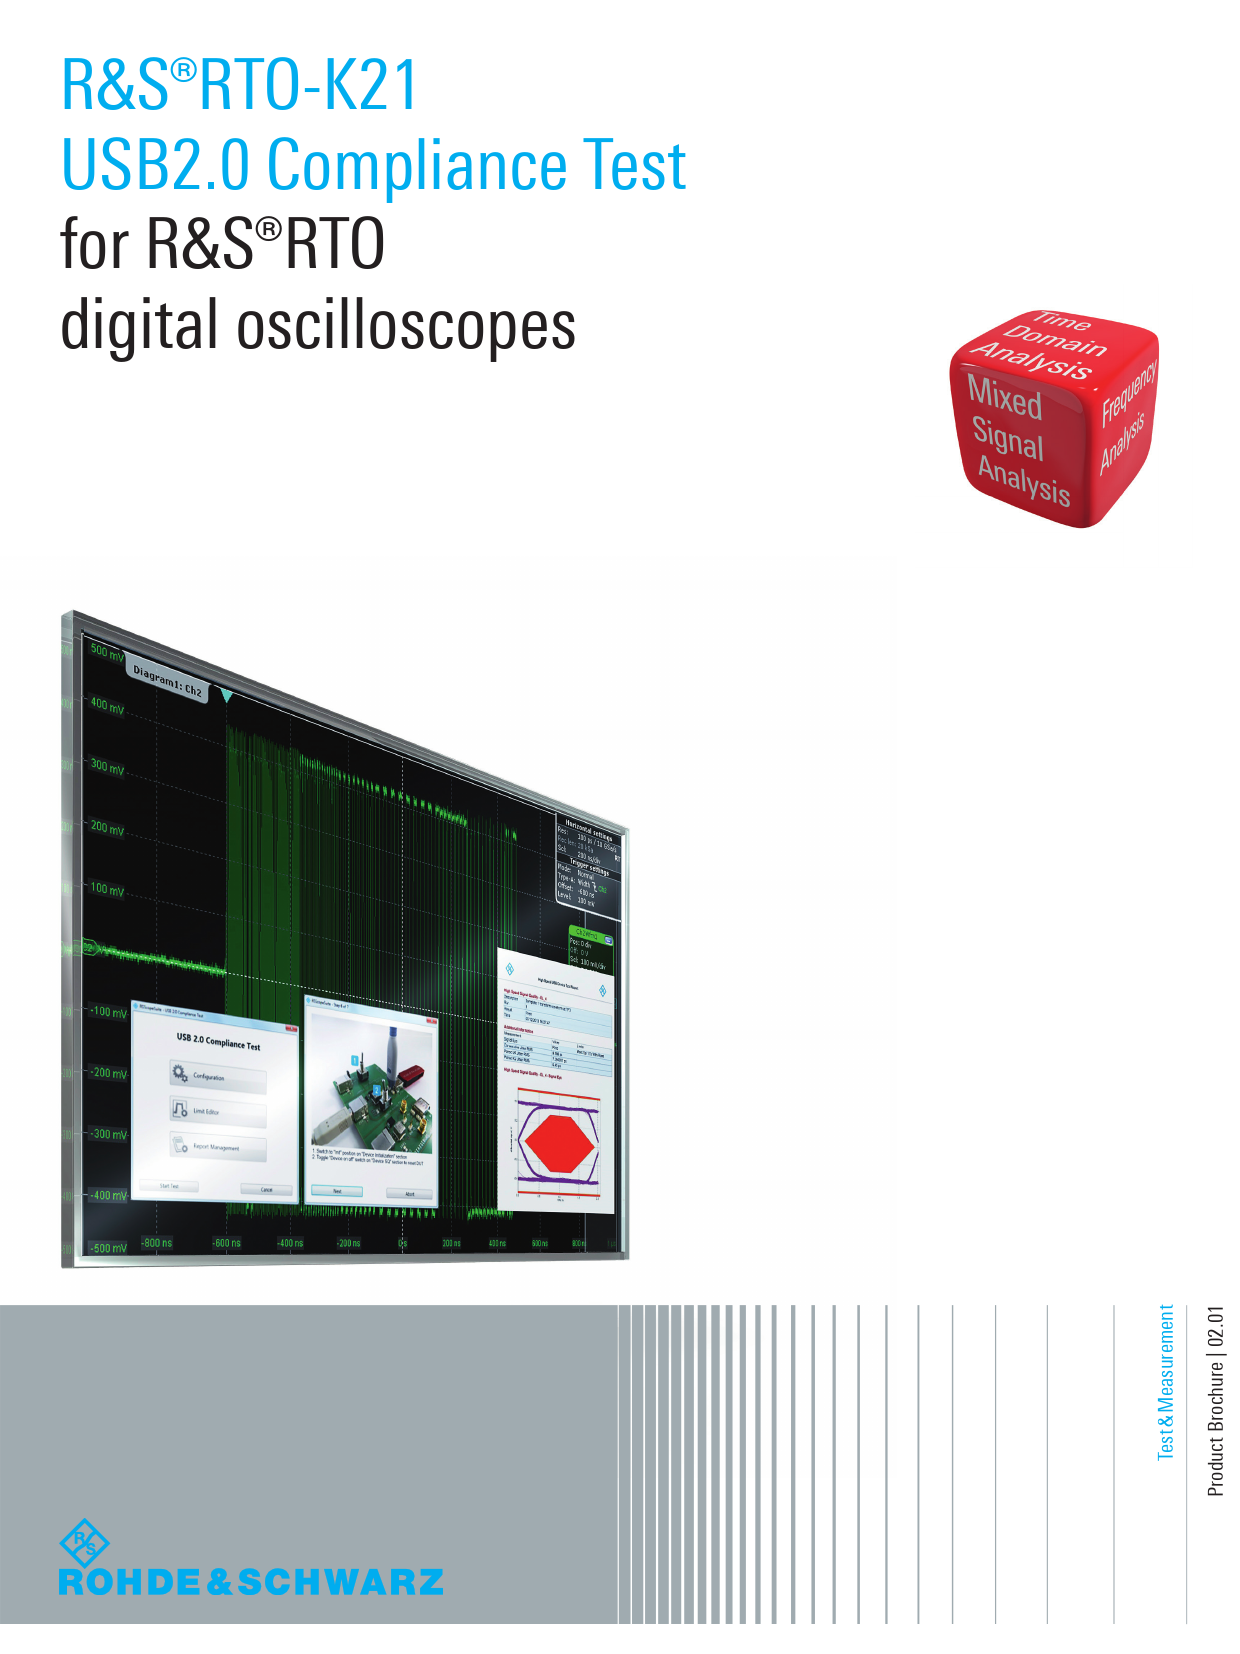 Product brochure RTO-K21 USB2.0 Compliance Test Rohde&Schwarz, Revision: 02.01